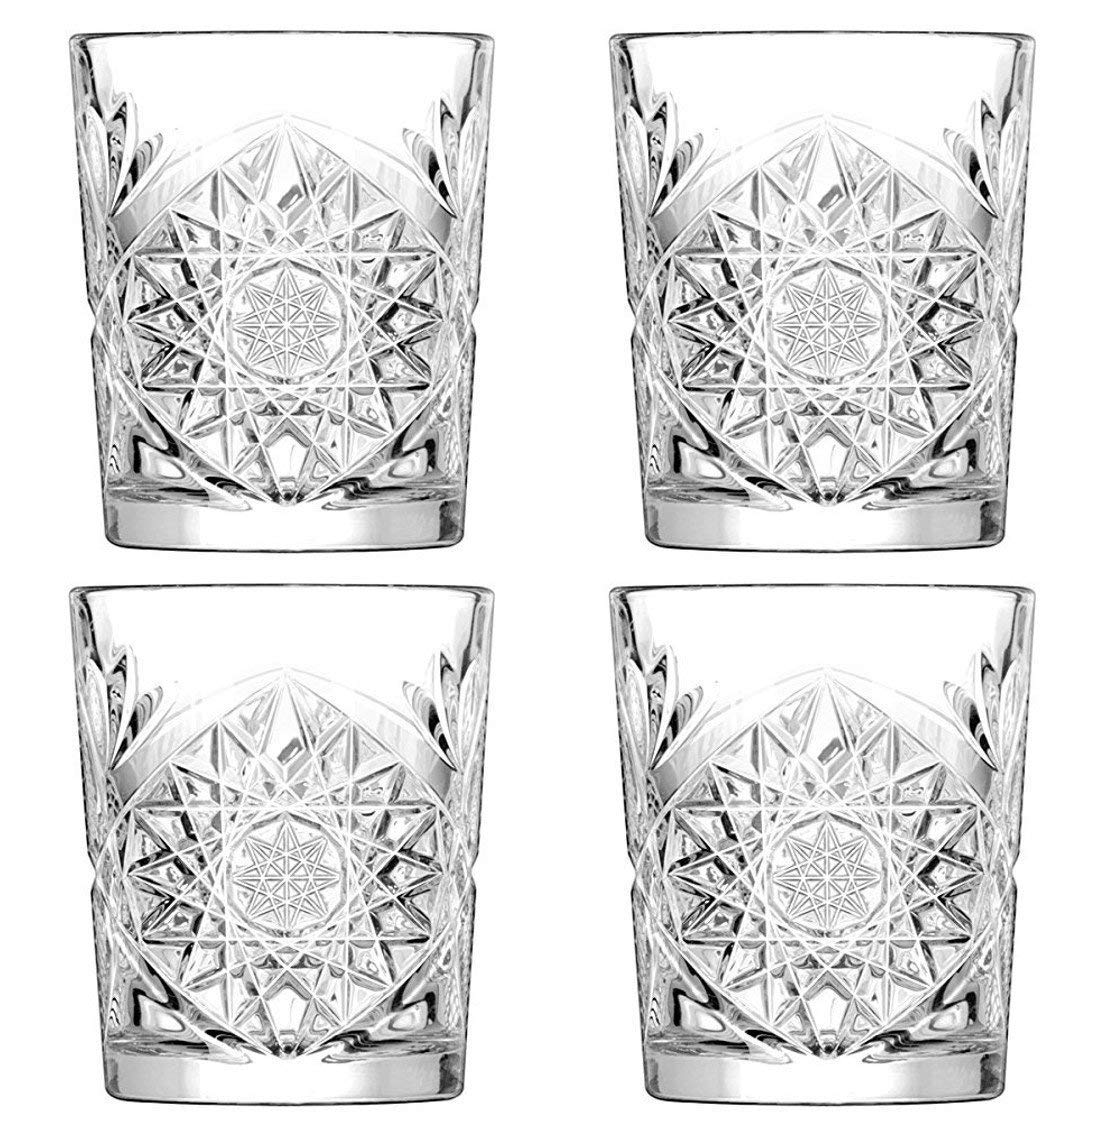 Hobstar Double Old Fashioned Glasses 12oz / 340ml - Set of 4 - Vintage Cut Glass Whisky Tumblers by Libbey